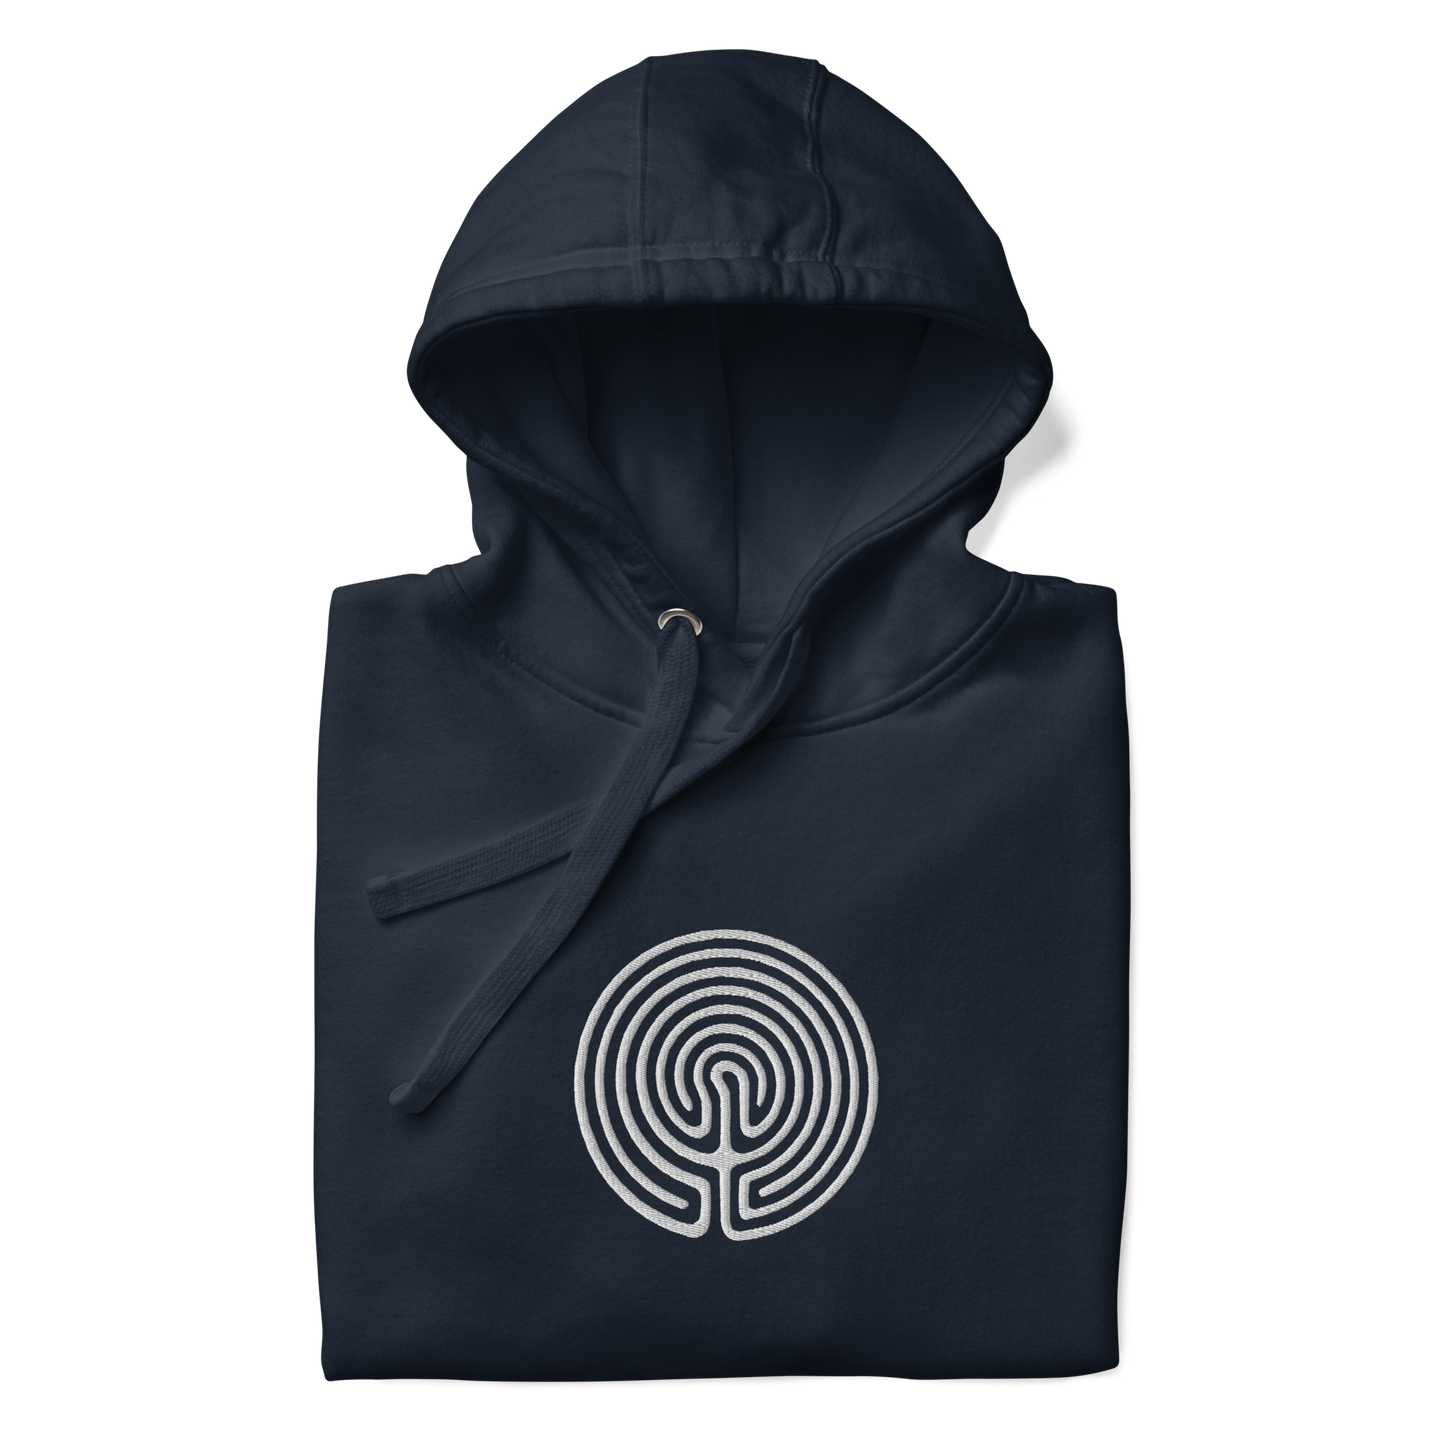 Embroidered Labyrinth  - Hoodie